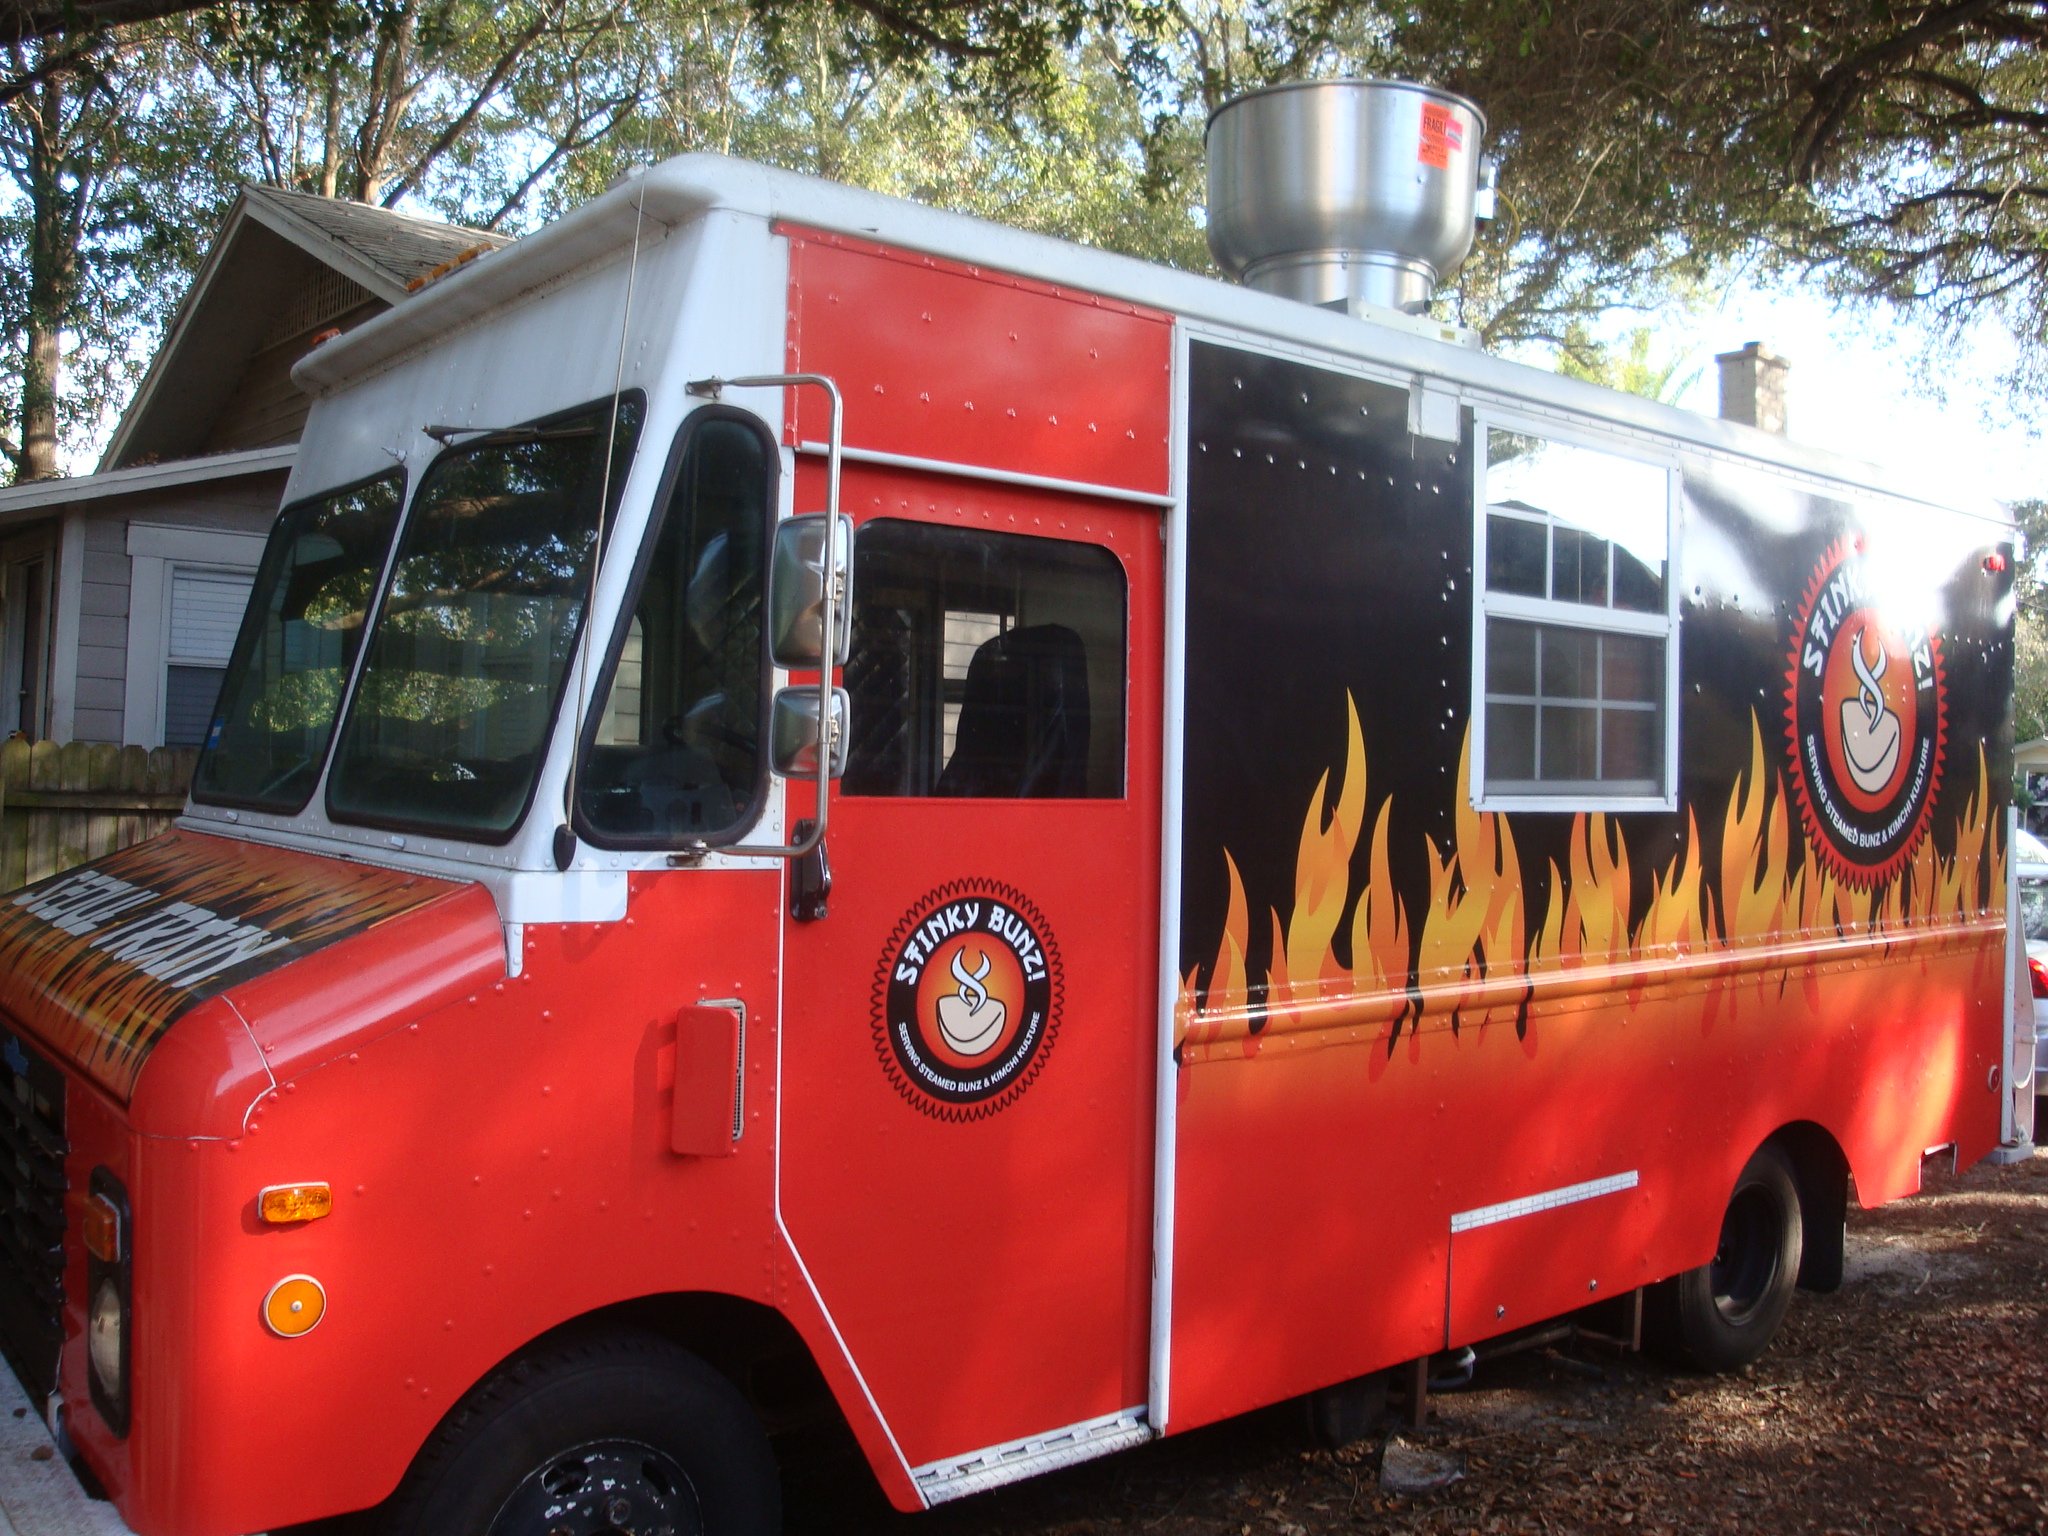 Stinky Buns Food Truck For Sale - Tampa Bay Food Trucks